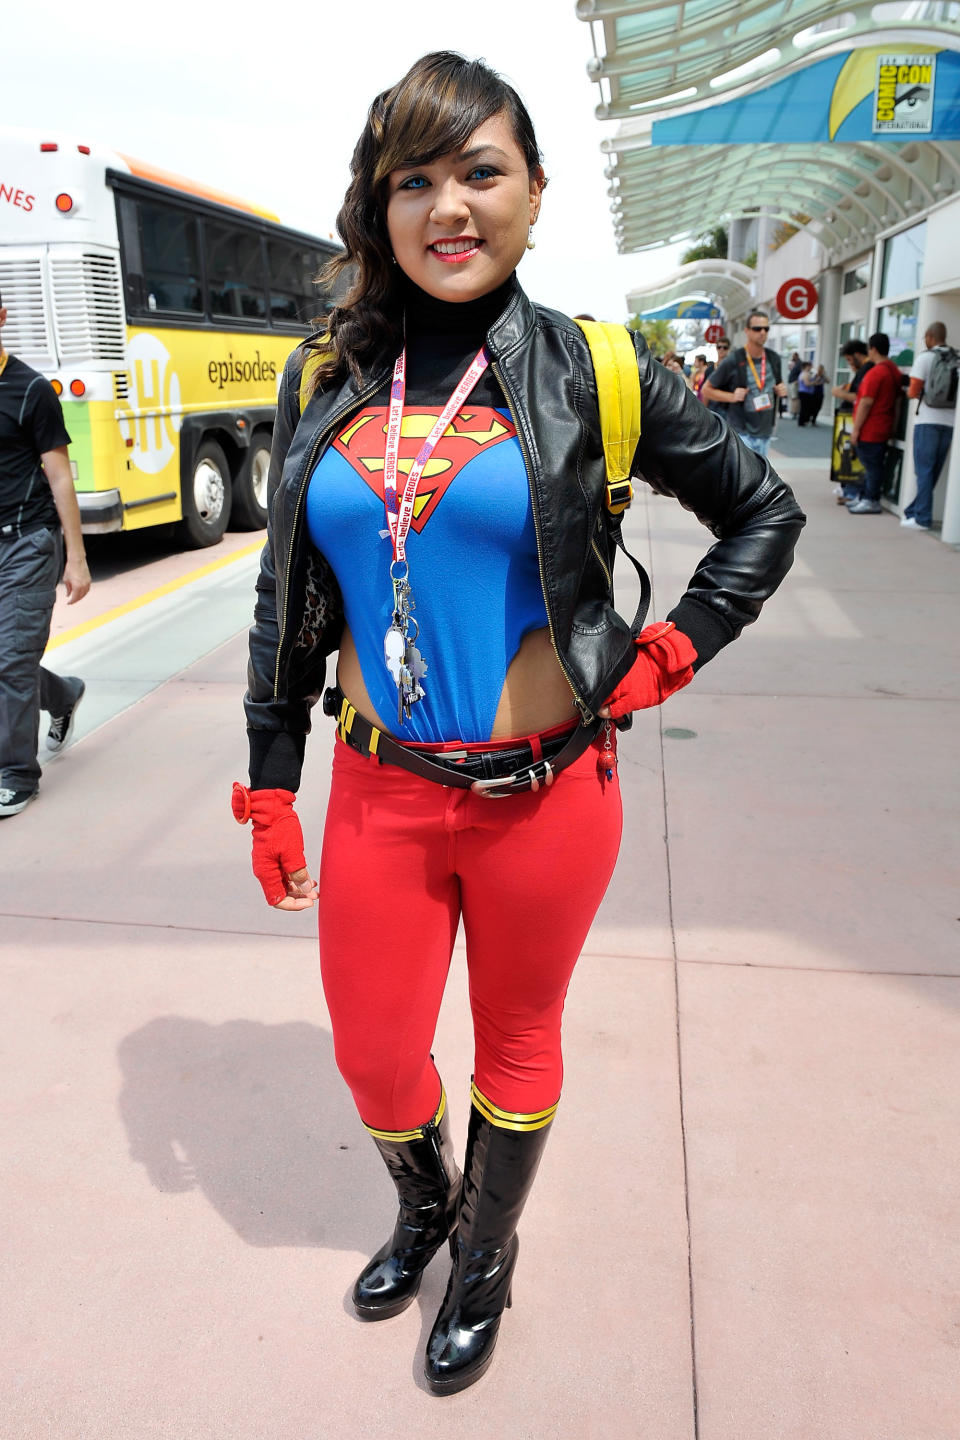 SAN DIEGO, CA - JULY 11: Ashley Lopez of San Diego dresses in cosplay for 2012 Comic-Con at the San Diego Convention Center on July 11, 2012 in San Diego, California. (Photo by Jerod Harris/Getty Images)